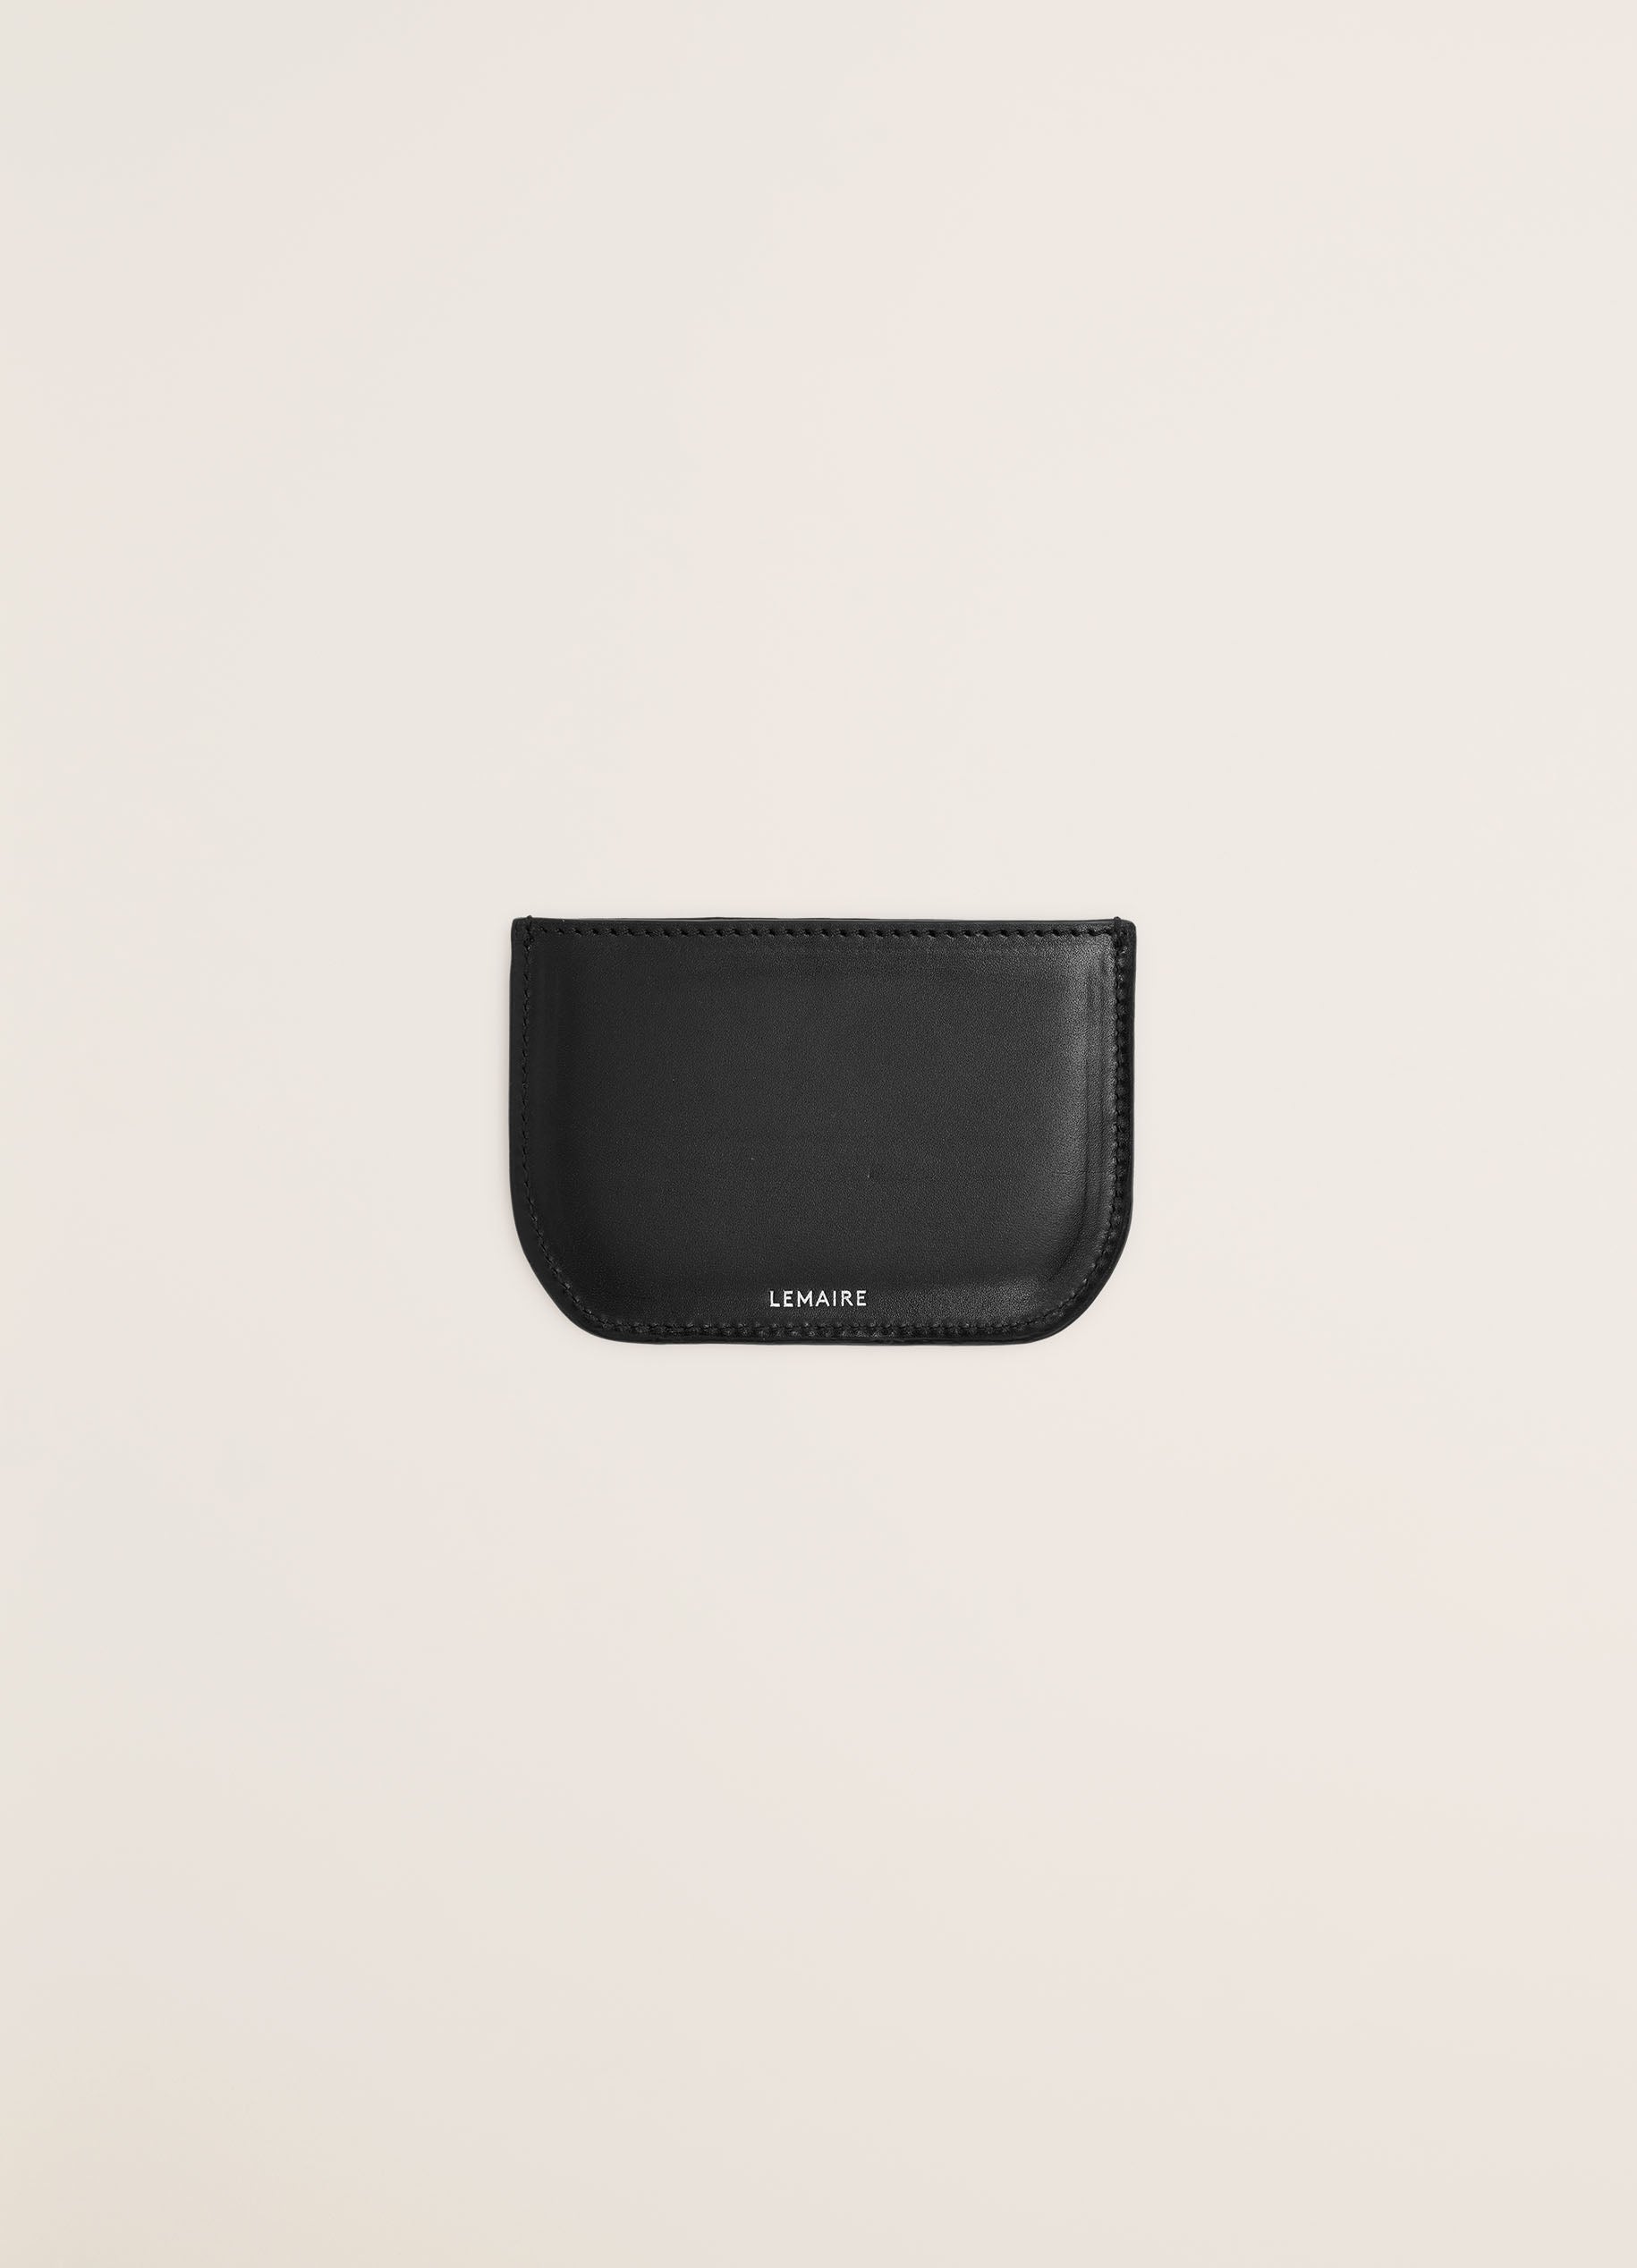 Black Calepin Card Holder in Shiny Box Leather | LEMAIRE